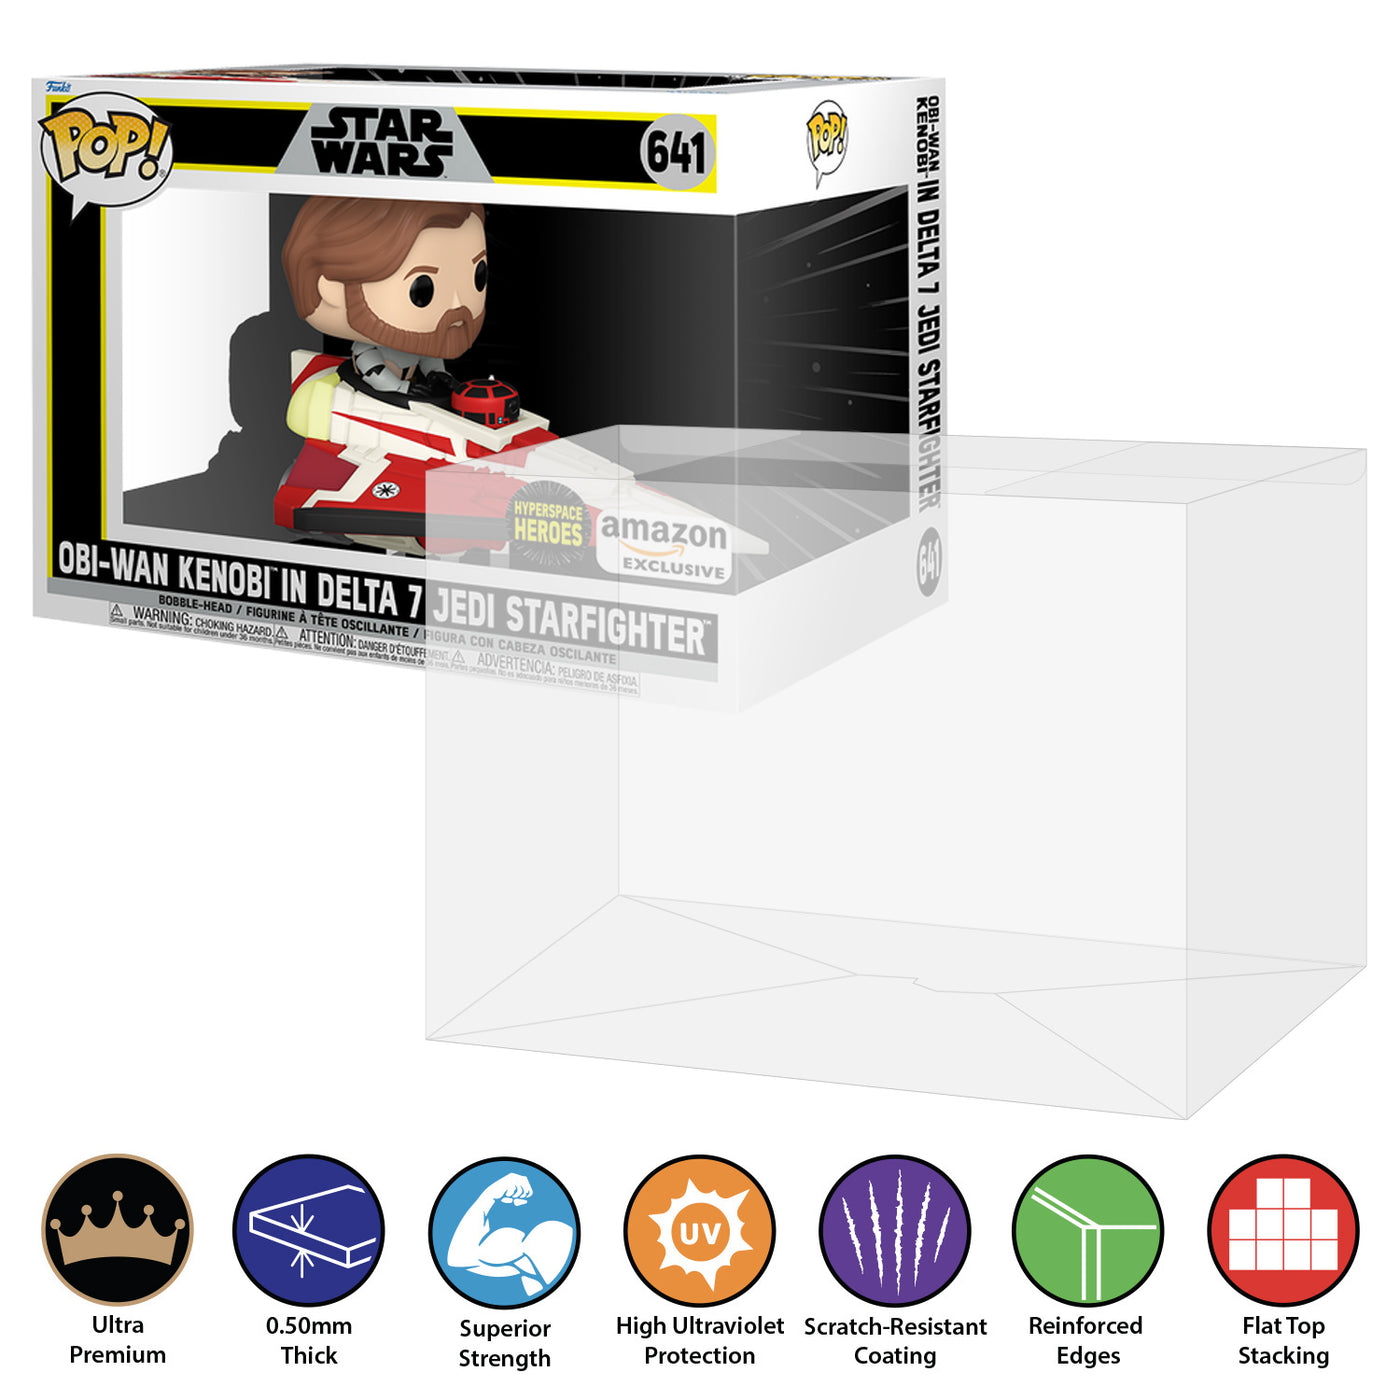 641 obi-wan kenobi in delta 7 jedi starfighter pop rides best funko pop protectors thick strong uv scratch flat top stack vinyl display geek plastic shield vaulted eco armor fits collect protect display case kollector protector